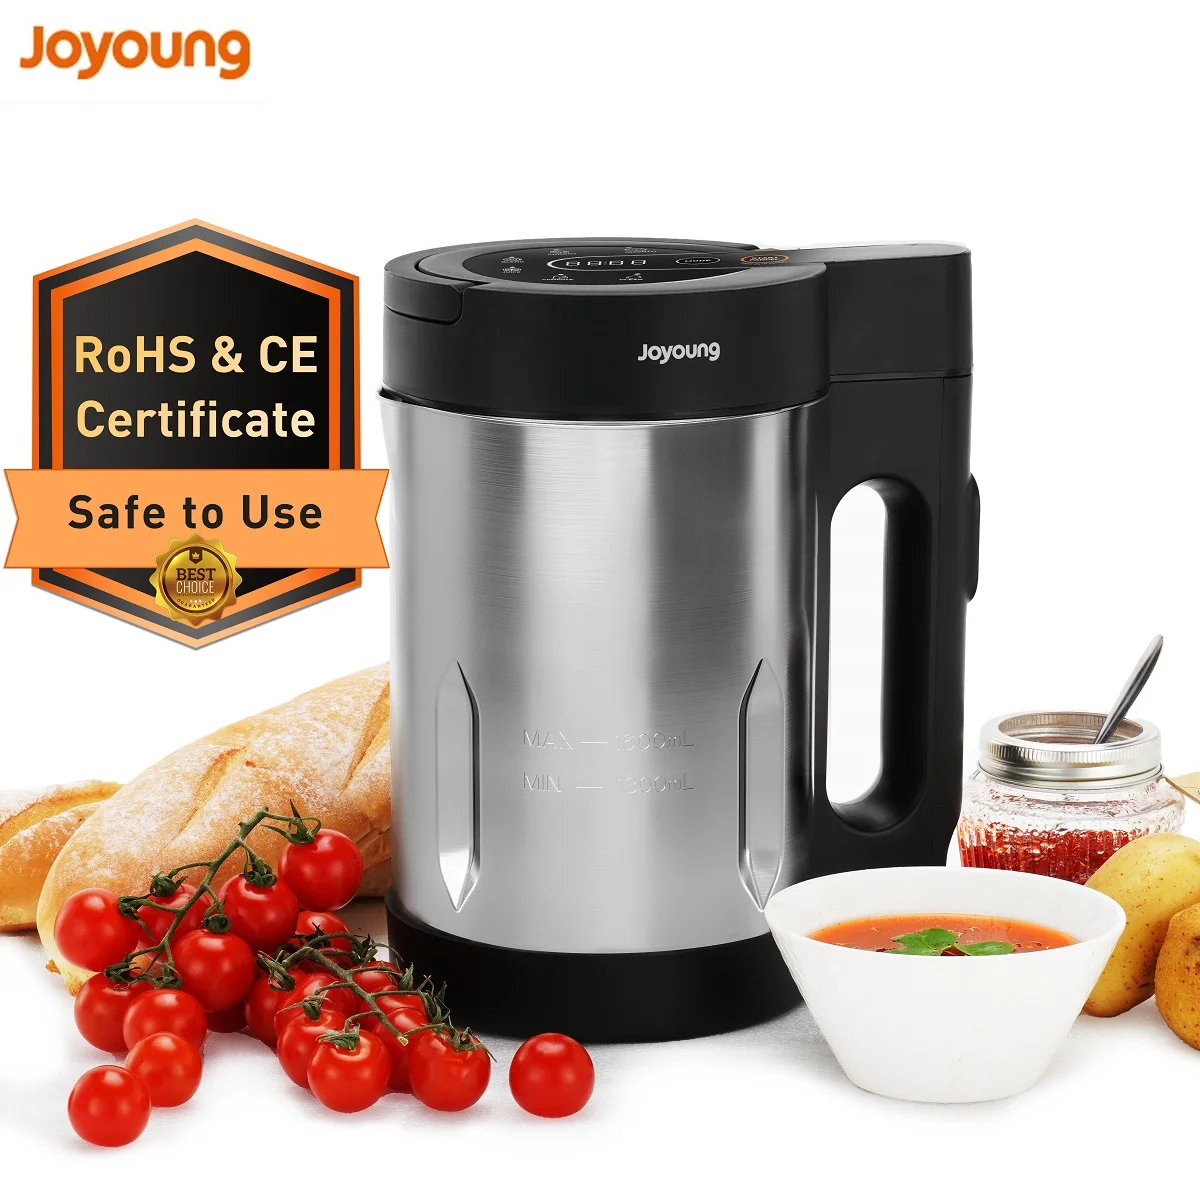 https://ae01.alicdn.com/kf/Sc48a8f118568469a8dda974fbdc629e2M/JOYOUNG-Soup-Maker-Soy-Almond-Nut-Vegan-Milk-Maker-Machine-Purees-Shakes-Smoothies-Baby-Foods-Cocktails.jpg